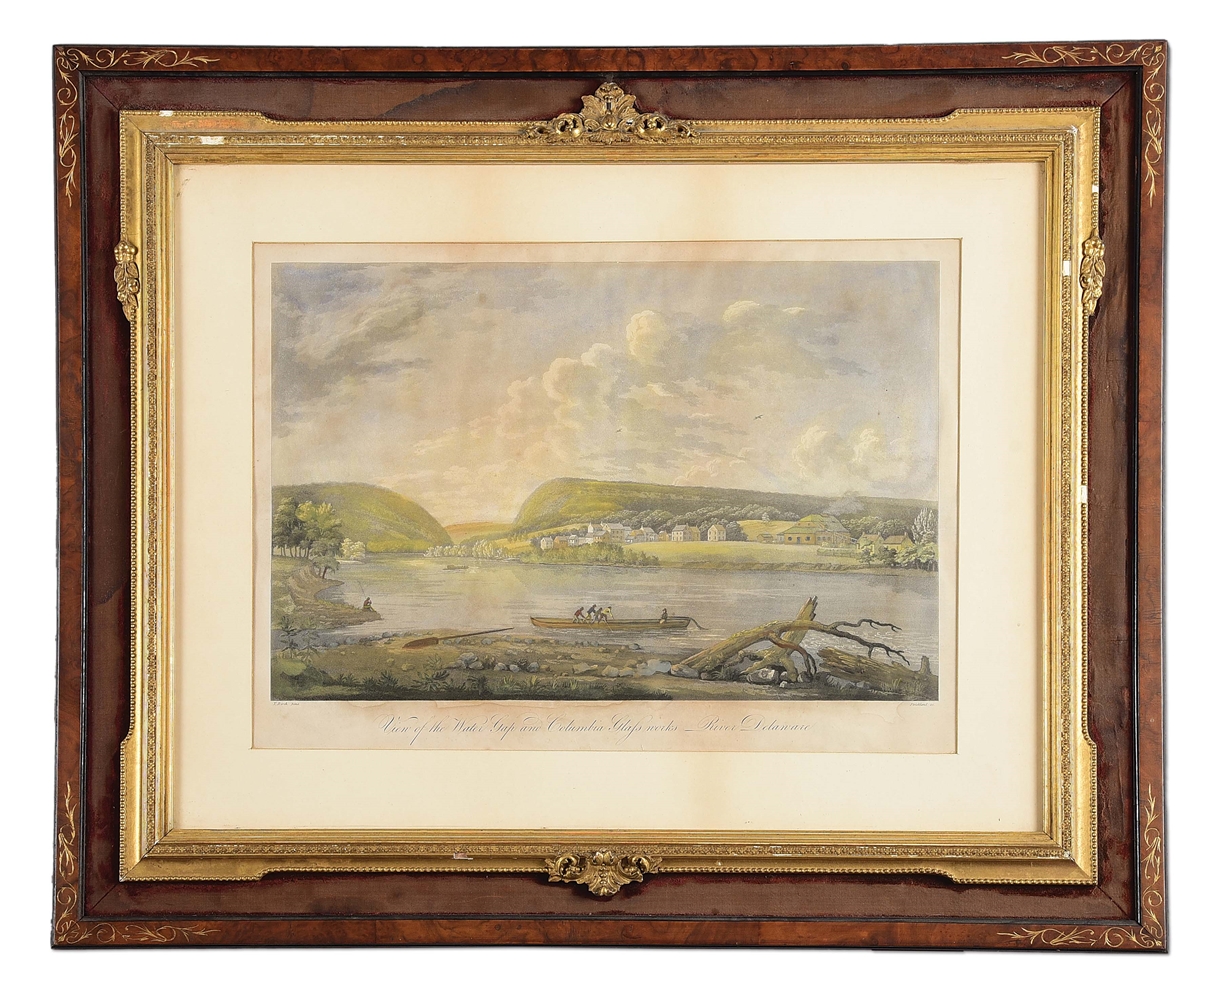 1820 PRINT OF THE VIEW OF THE WATER GAP AND COLUMBIA GLASS WORKS RIVER DELAWARE.